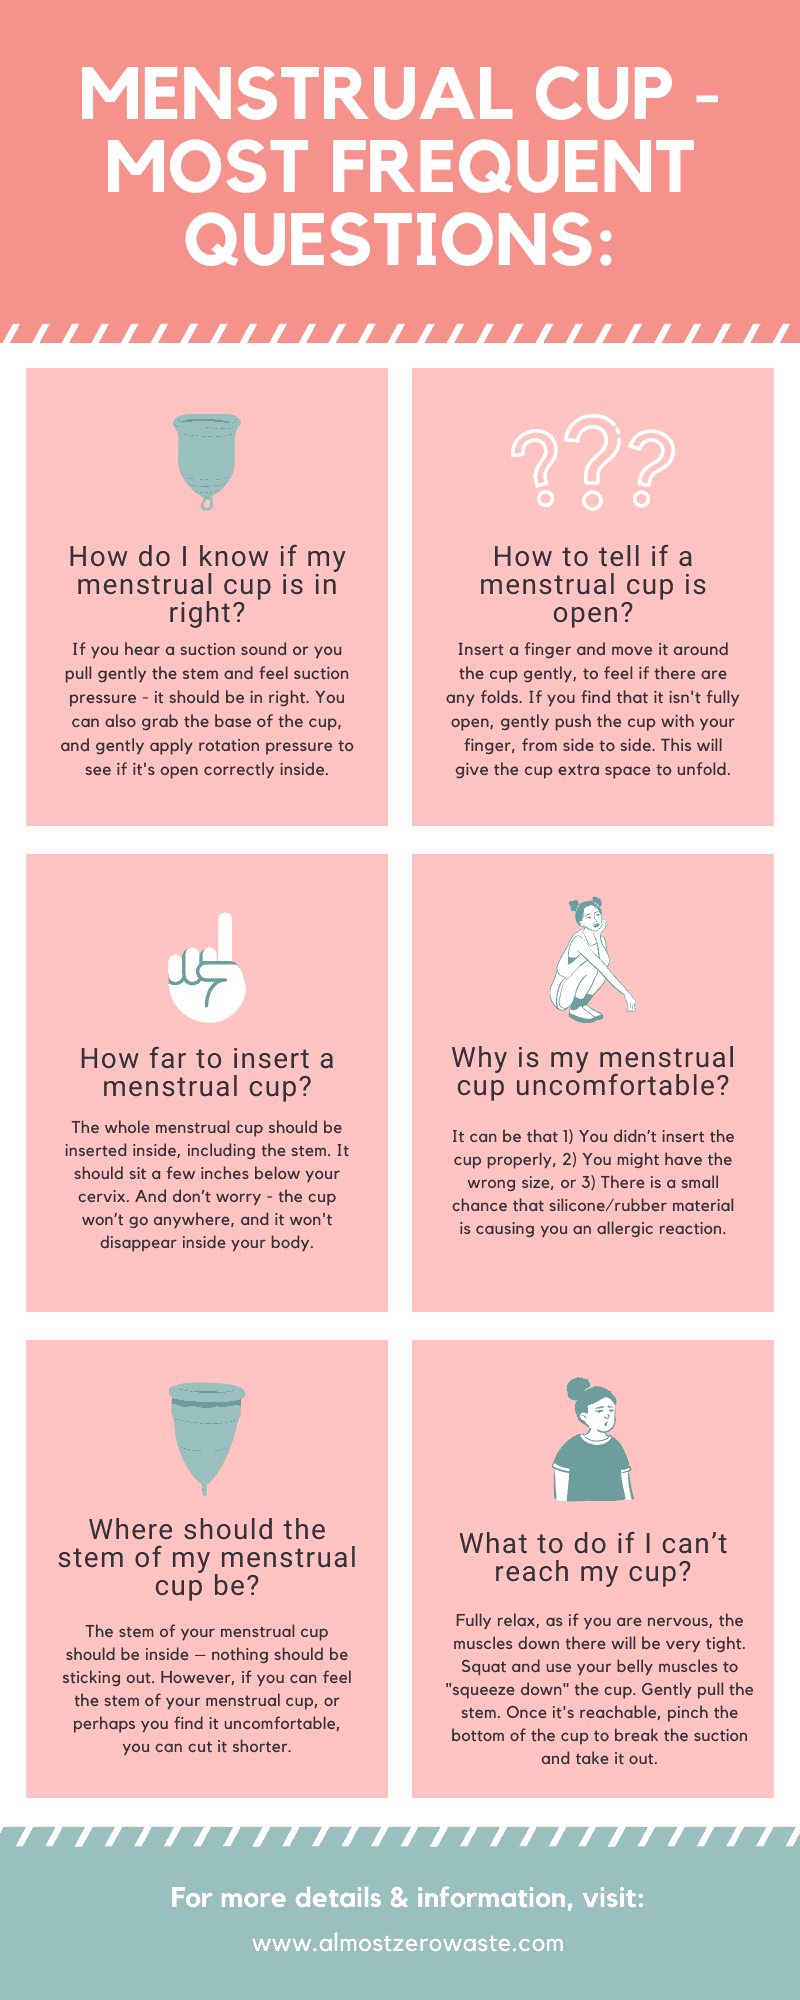 How do I know if my menstrual cup is in right (infographic)